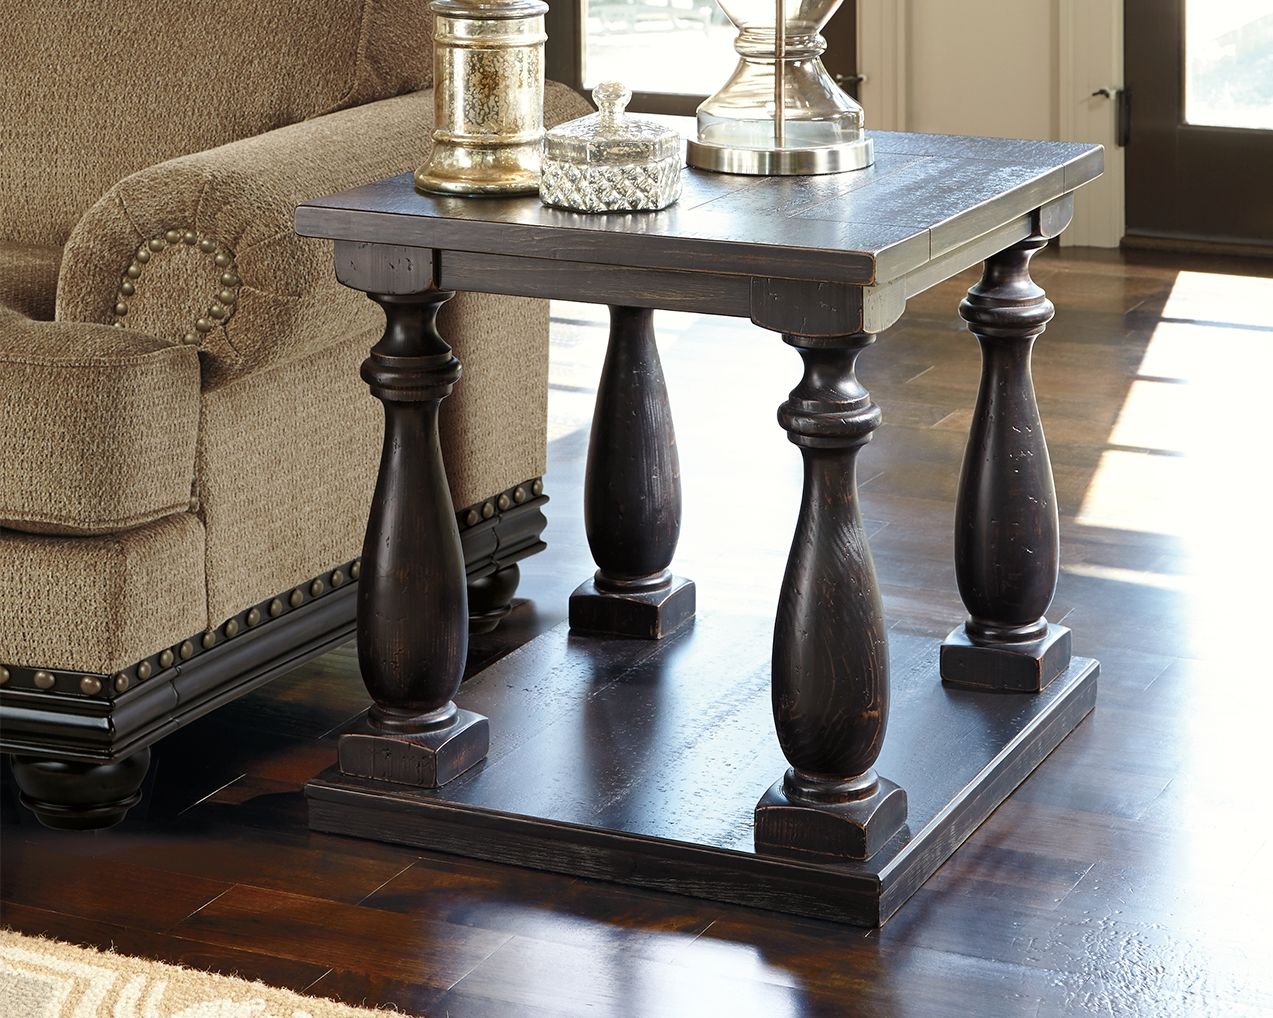 Mallacar - Black - Rectangular End Table Tony's Home Furnishings Furniture. Beds. Dressers. Sofas.